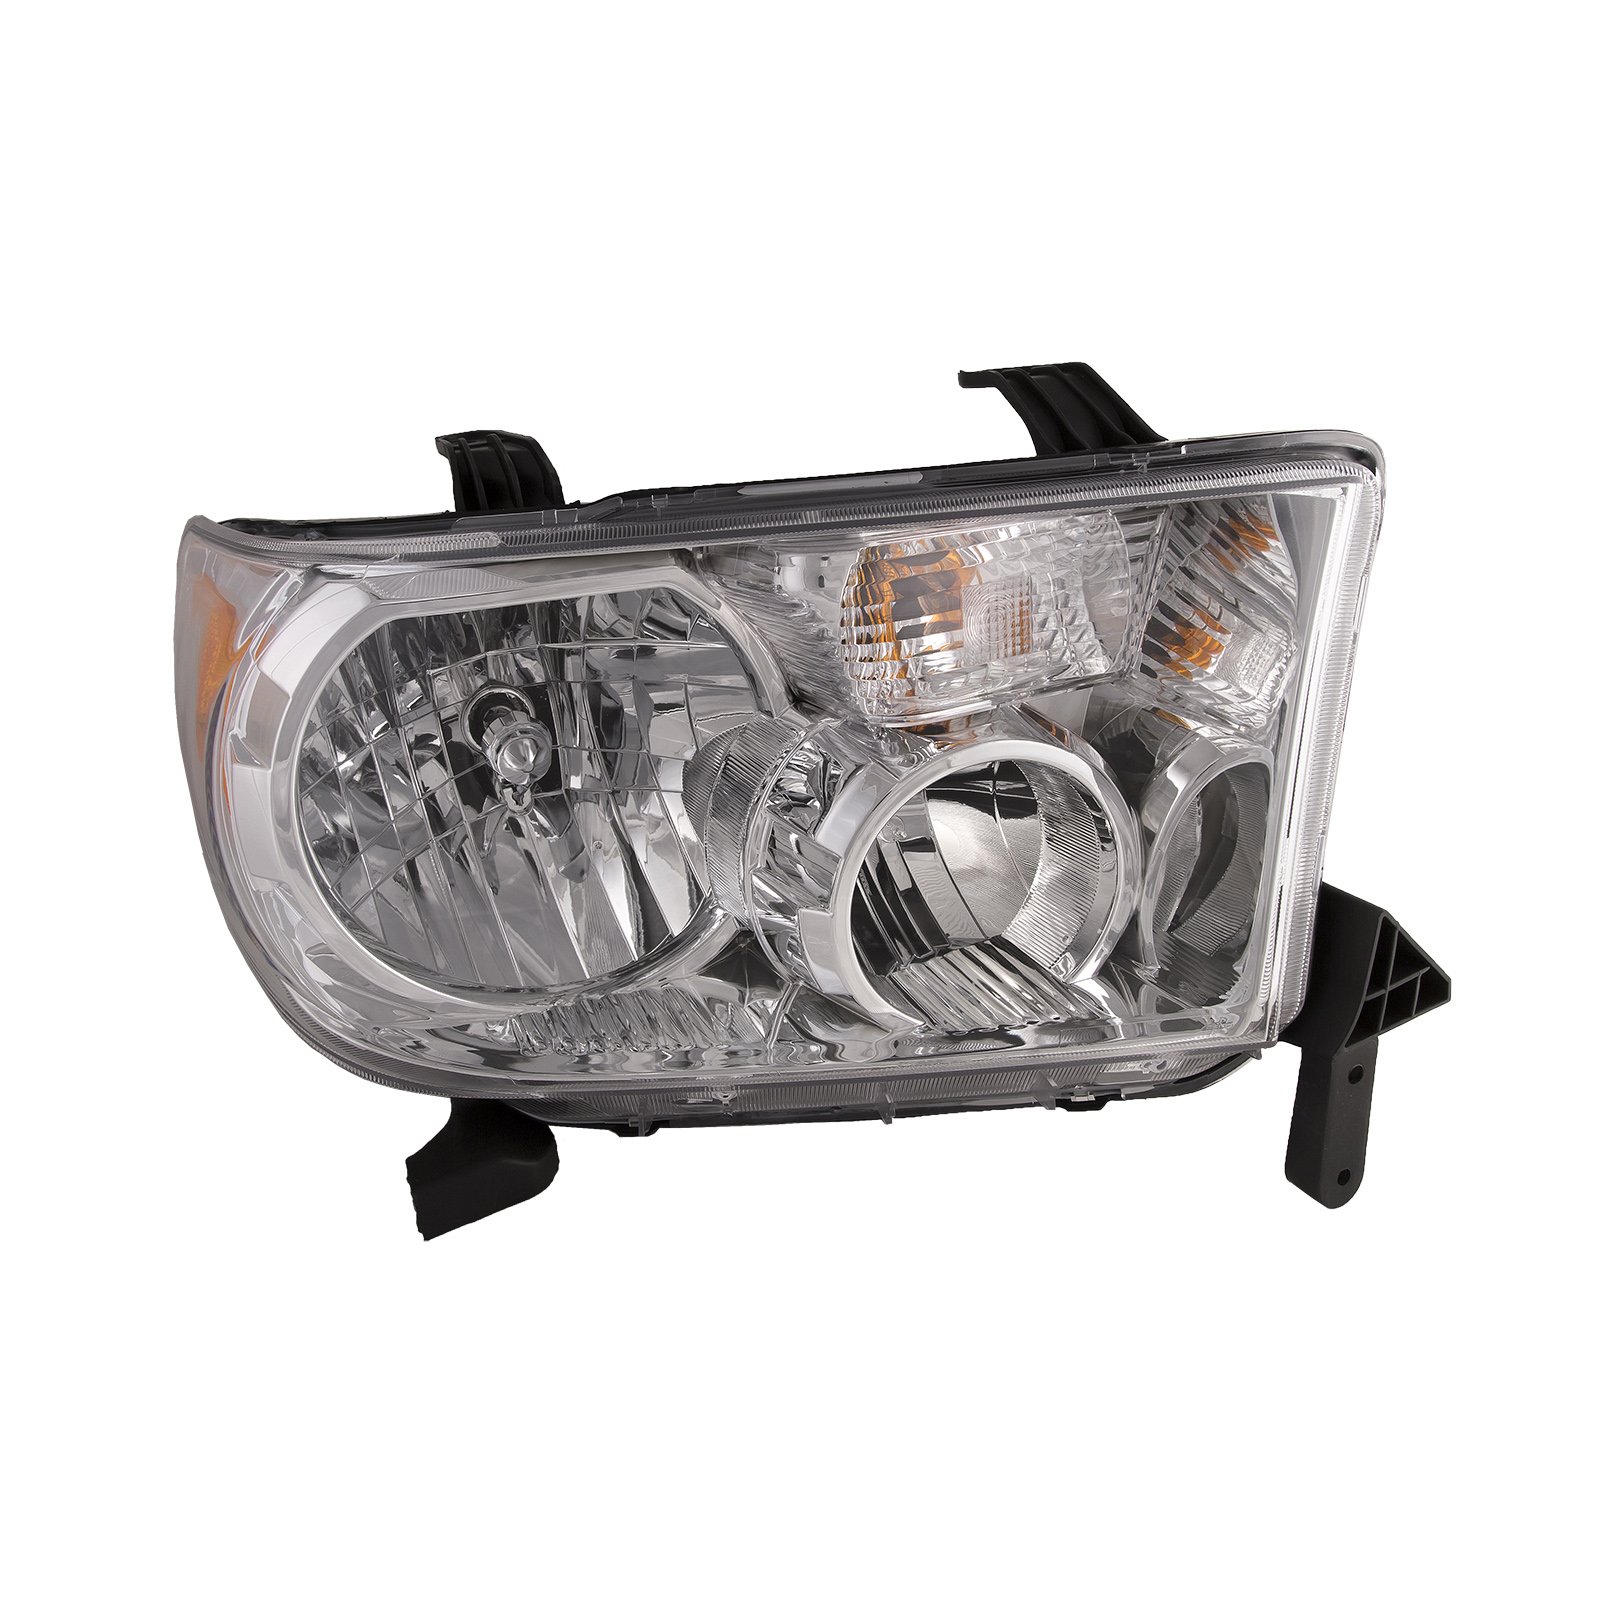 Headlight Halogen Right Passenger Fits 2007-2017 Toyota Tundra/2008-2015  Sequoia (Does NOT Have Automatic level adjuster). Bulbs are Not Included.